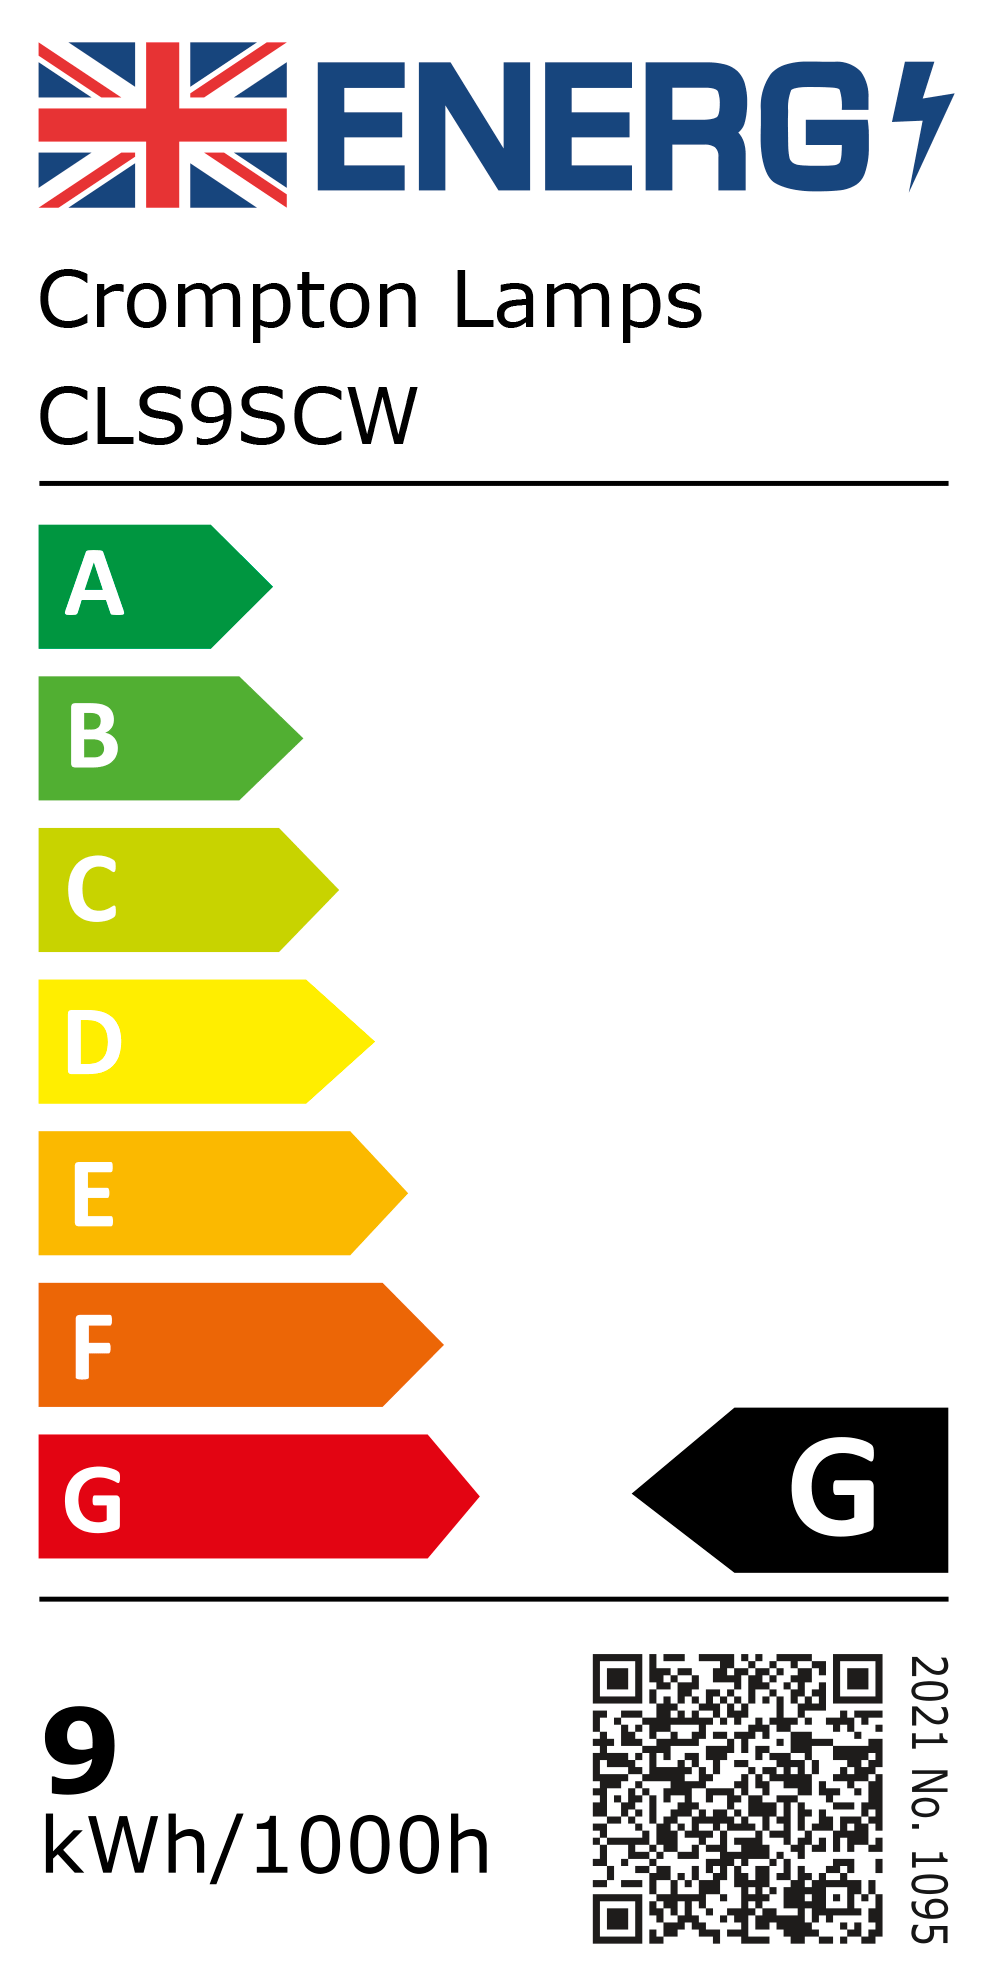 New 2021 Energy Rating Label: Stock Code CLS9SCW